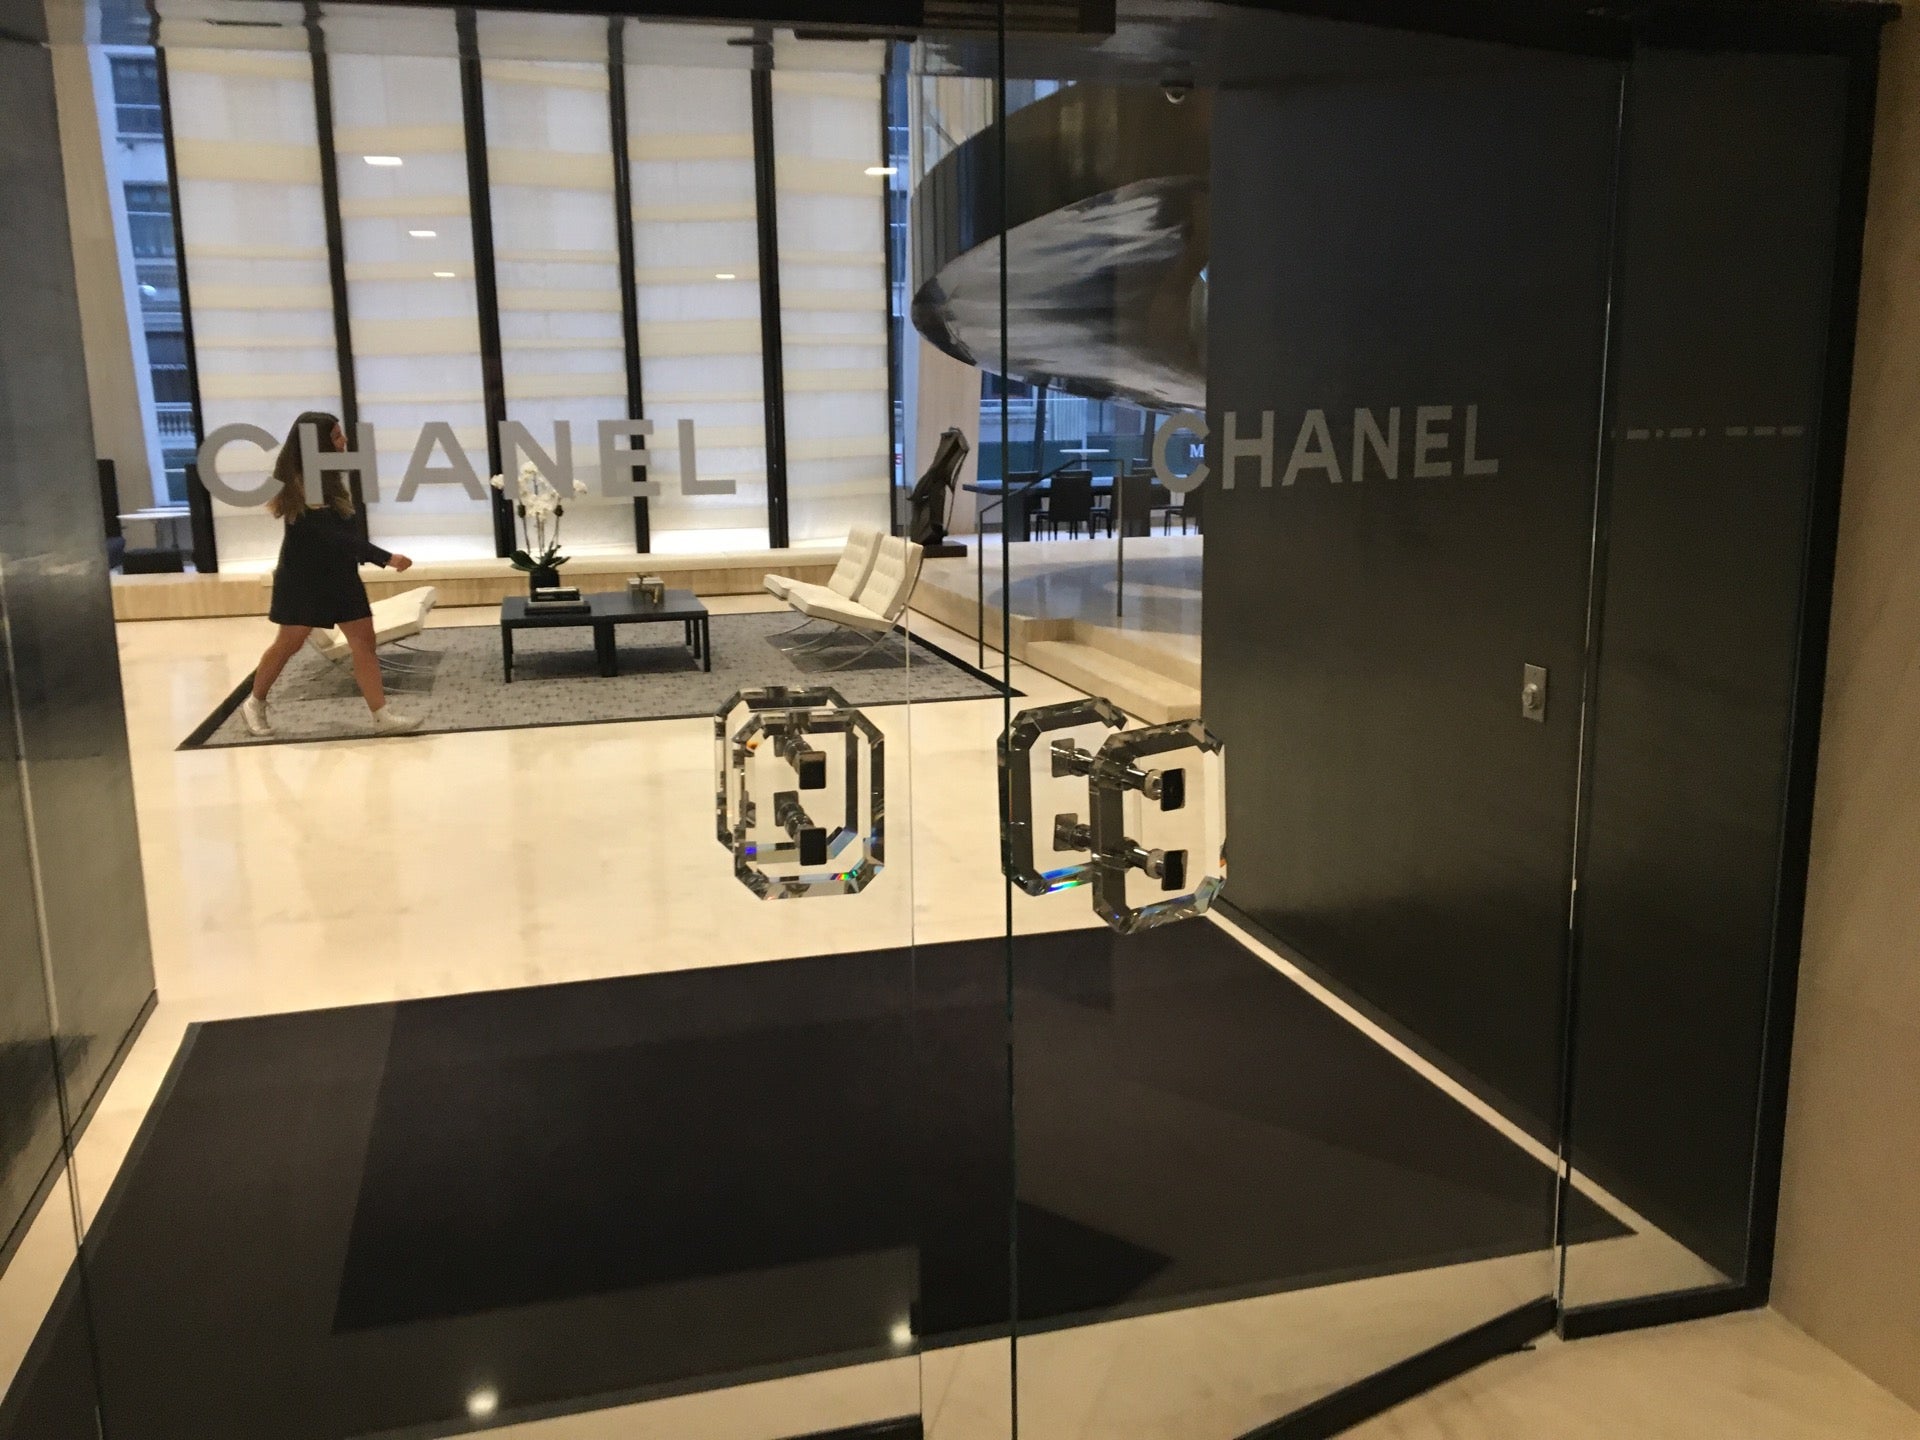 Chanel, 9 W 57th St, Fl 44, New York, NY, Clothing Retail - MapQuest